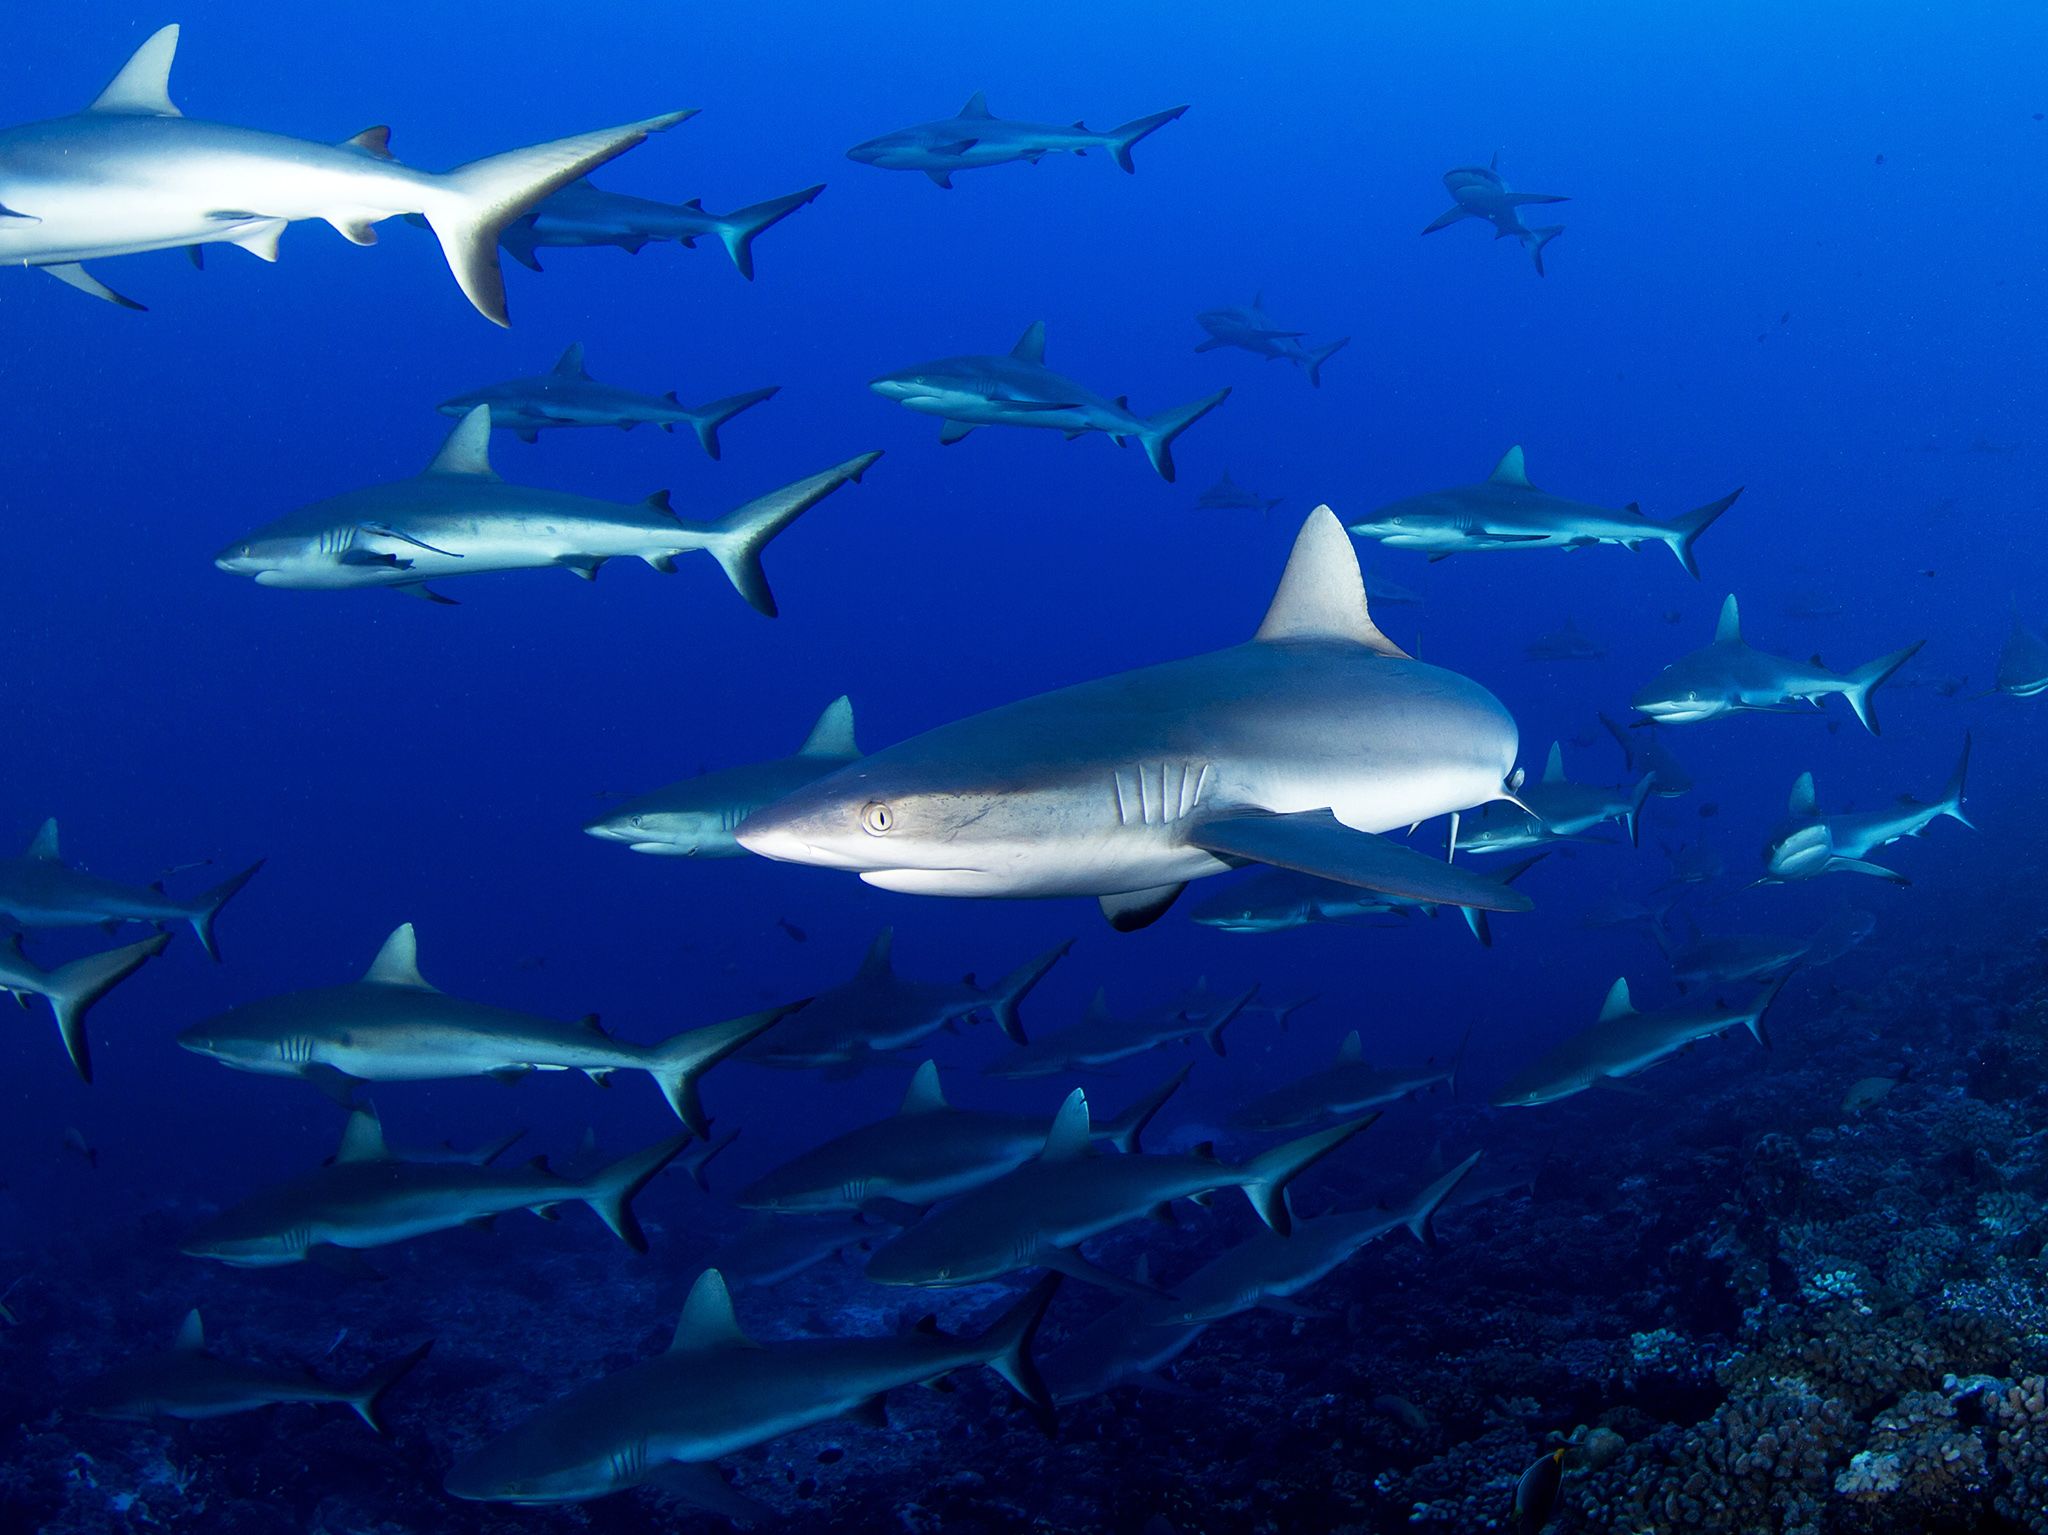 Fakarava, Tahiti: Grey reef sharks swarm. This image is from Shark Swarm. [Photo of the day - August 2017]